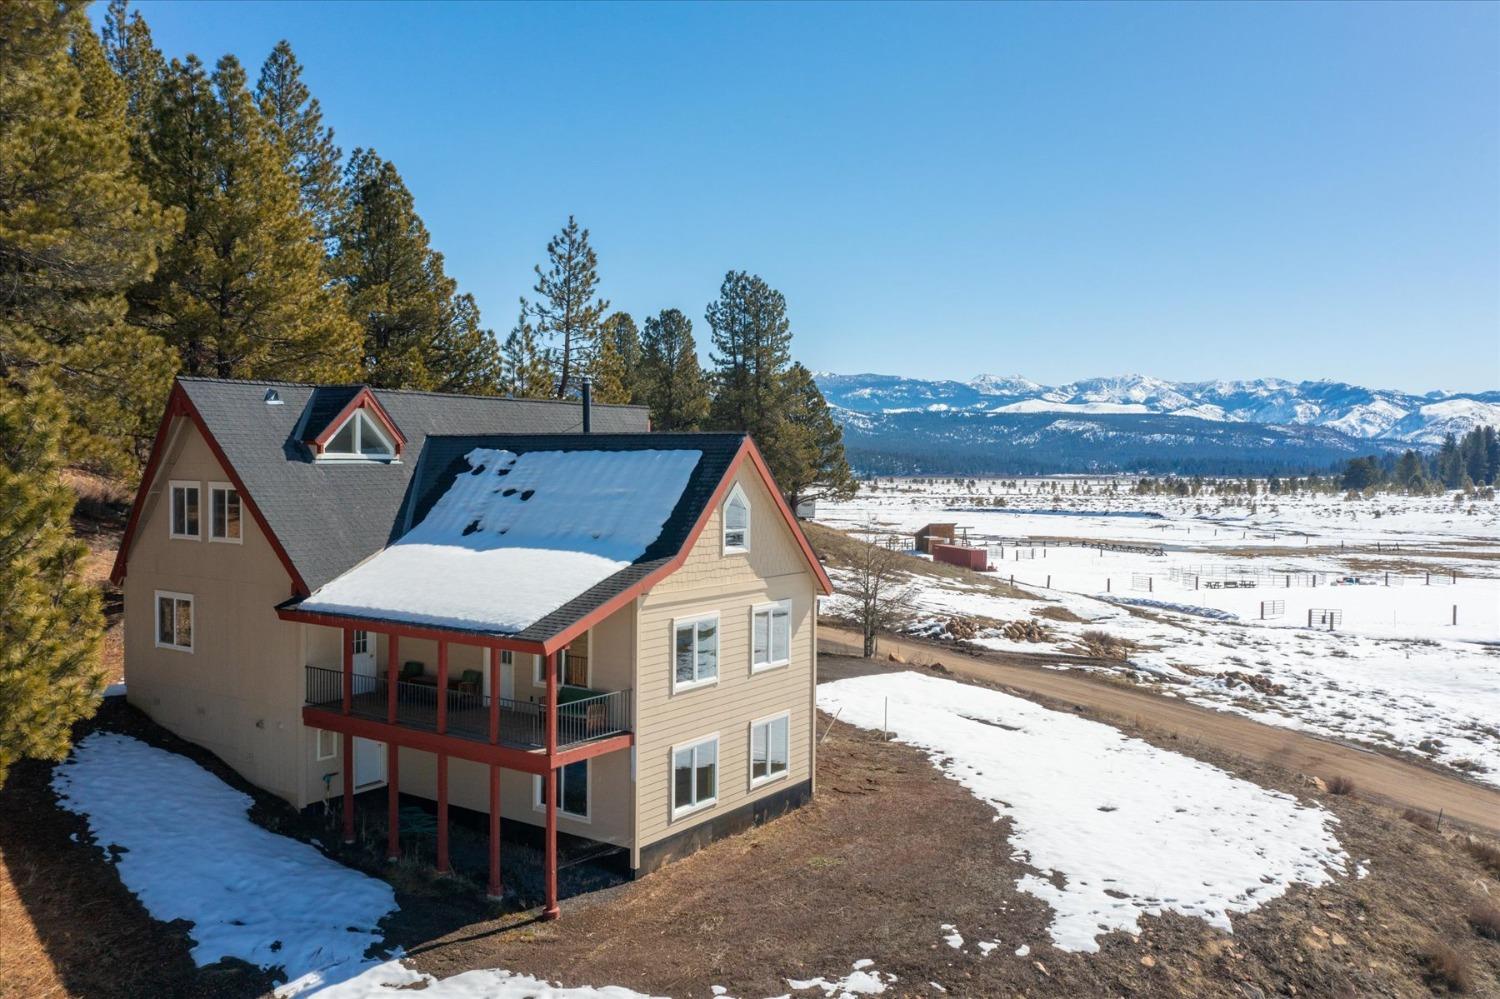 Photo of 14251 Russel Valley Rd in Truckee, CA